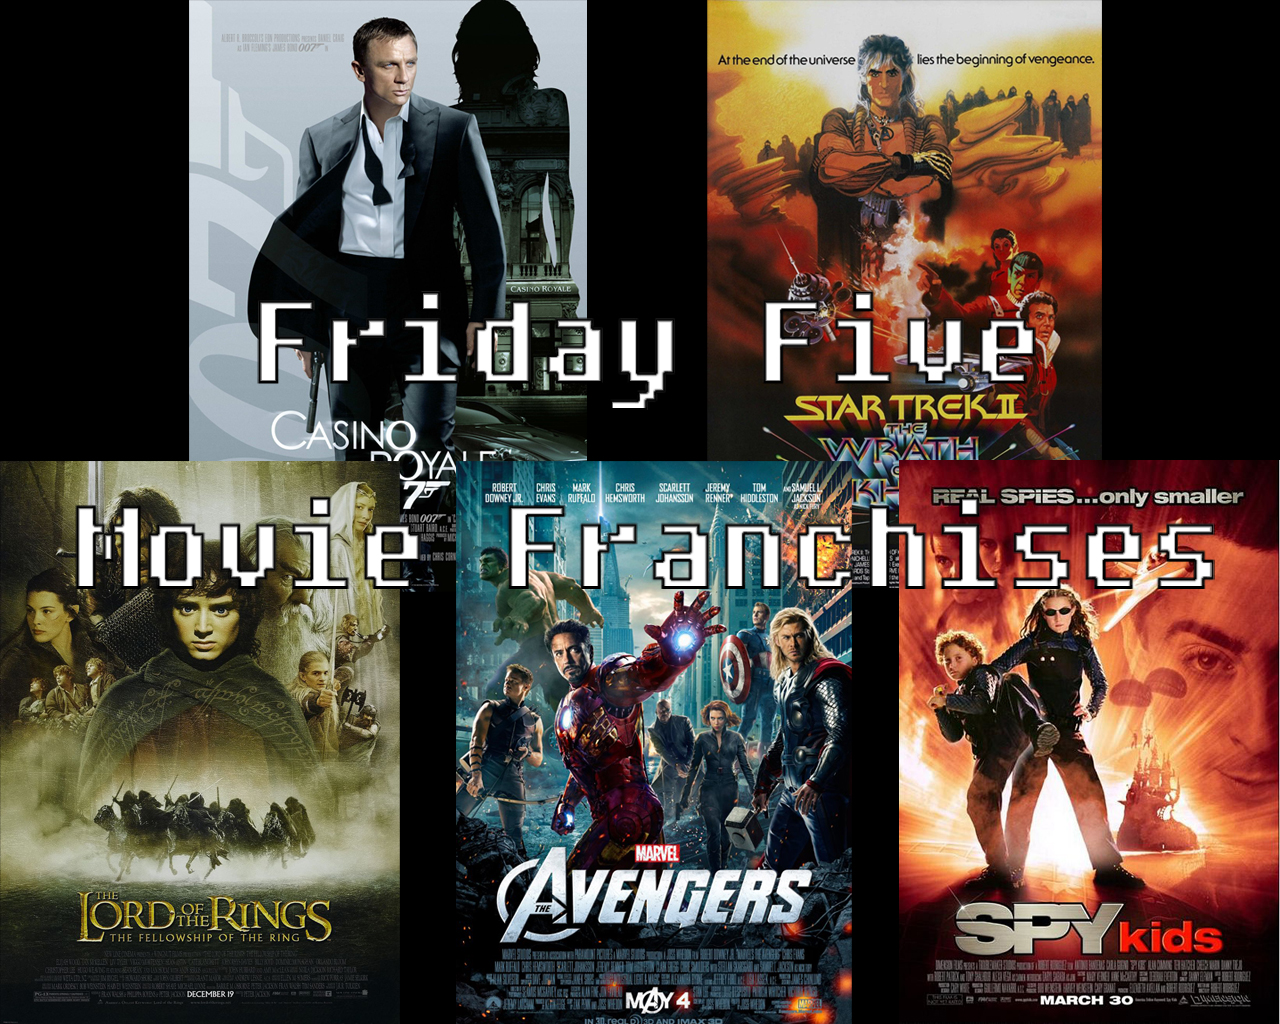 Casino Royale, Avengers, Wrath of Kahn, Lord of the RIngs, Spy Kids movie posters